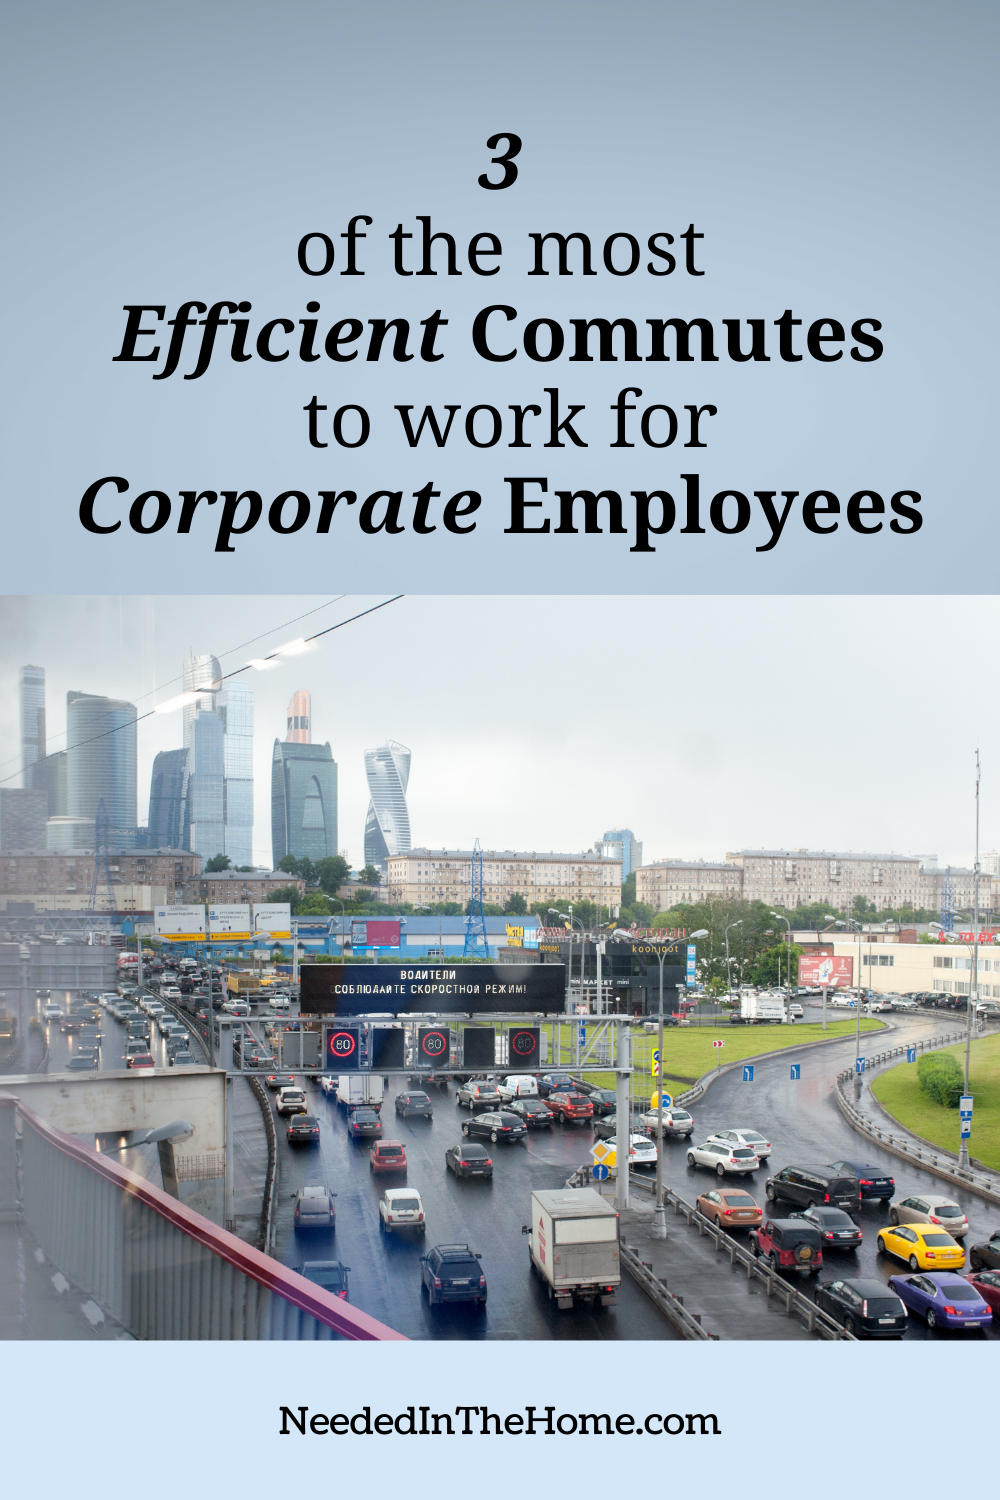 pinterest-pin-description 3 of the most efficient commutes to work for corporate employees traffic in city neededinthehome